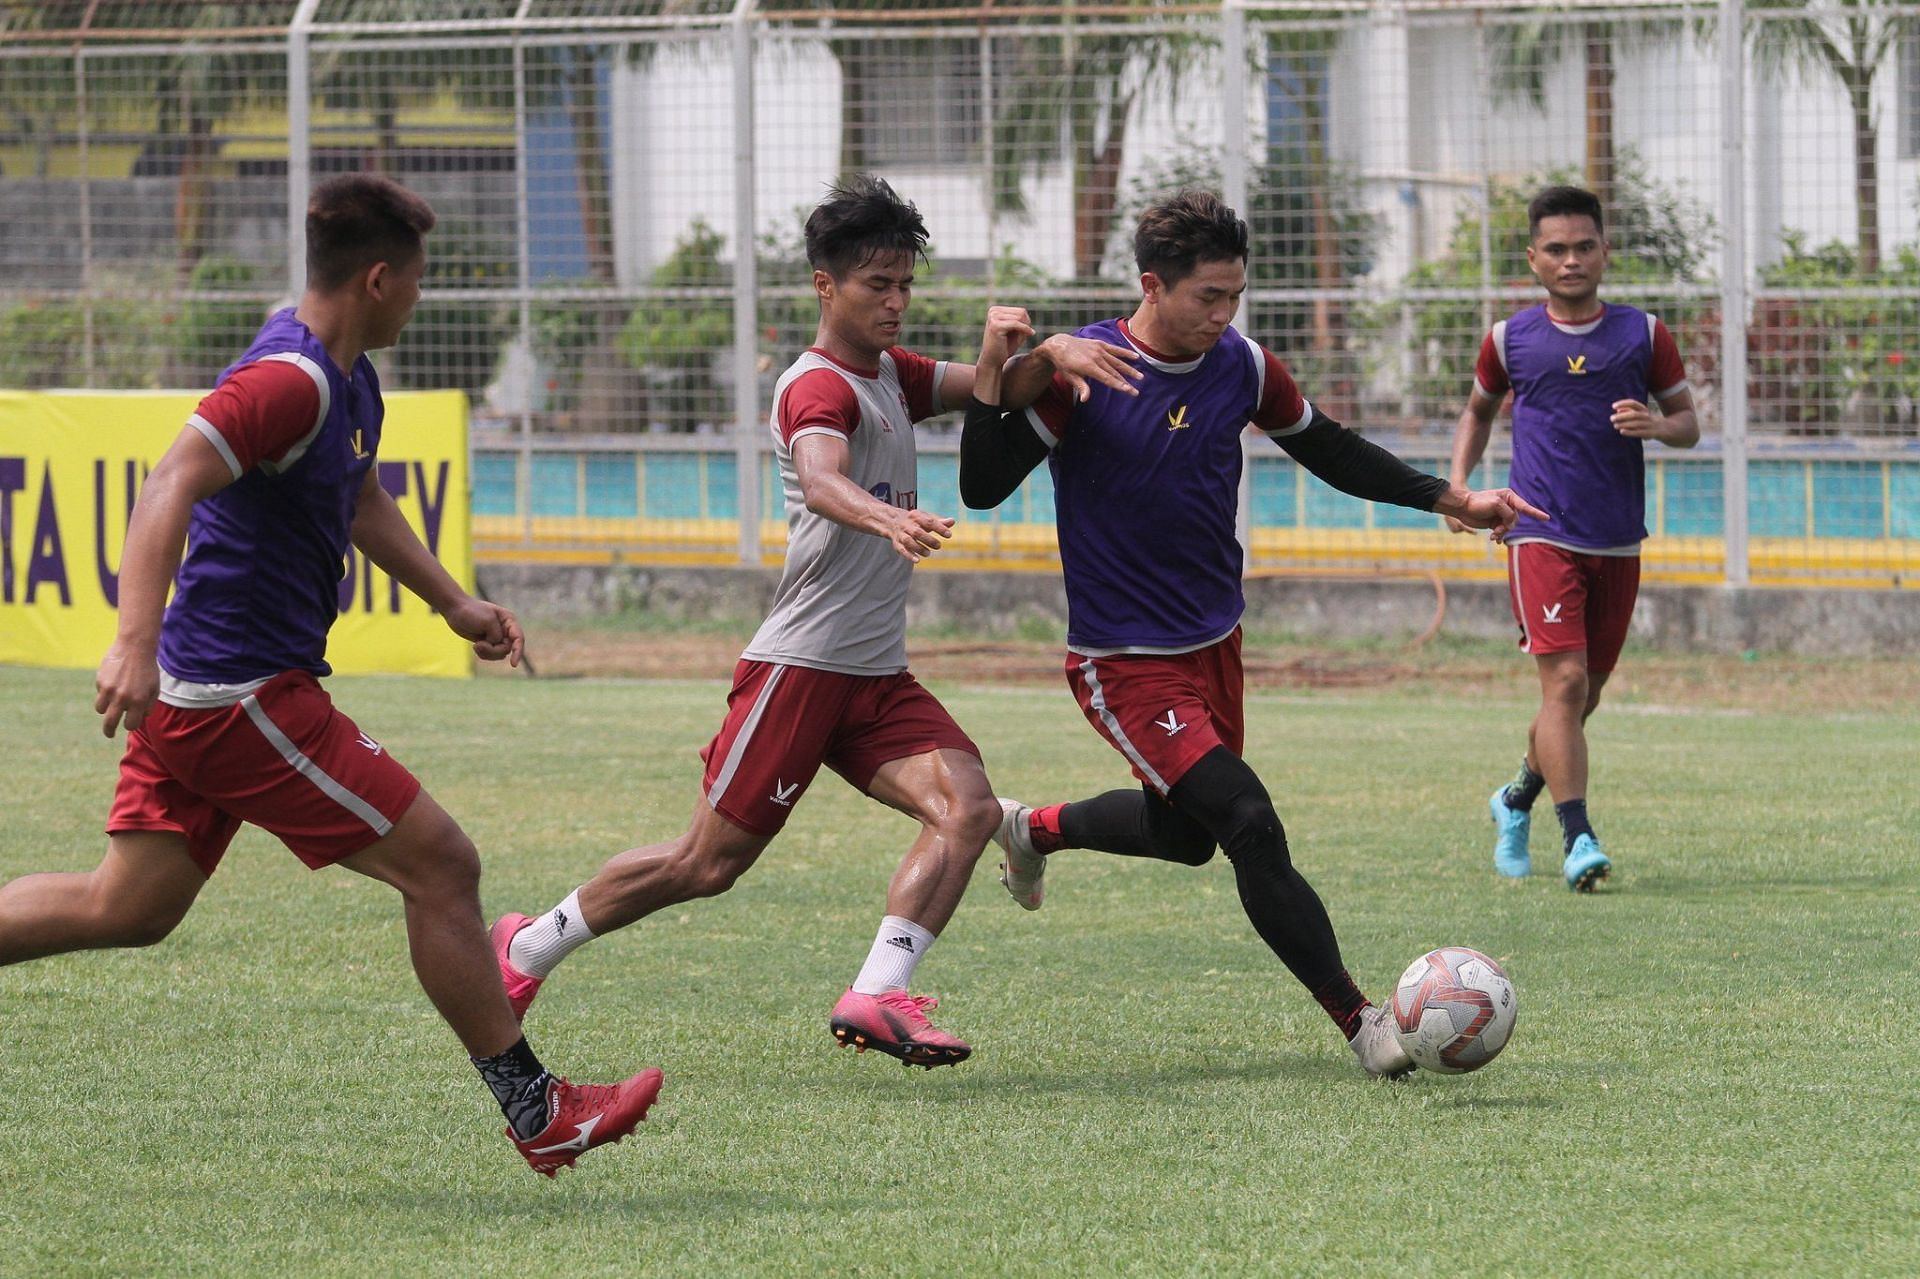 Aizawl FC players practice ahead of their upcoming I-League encounter against Kenkre FC - Image Courtesy: I-League Twitter